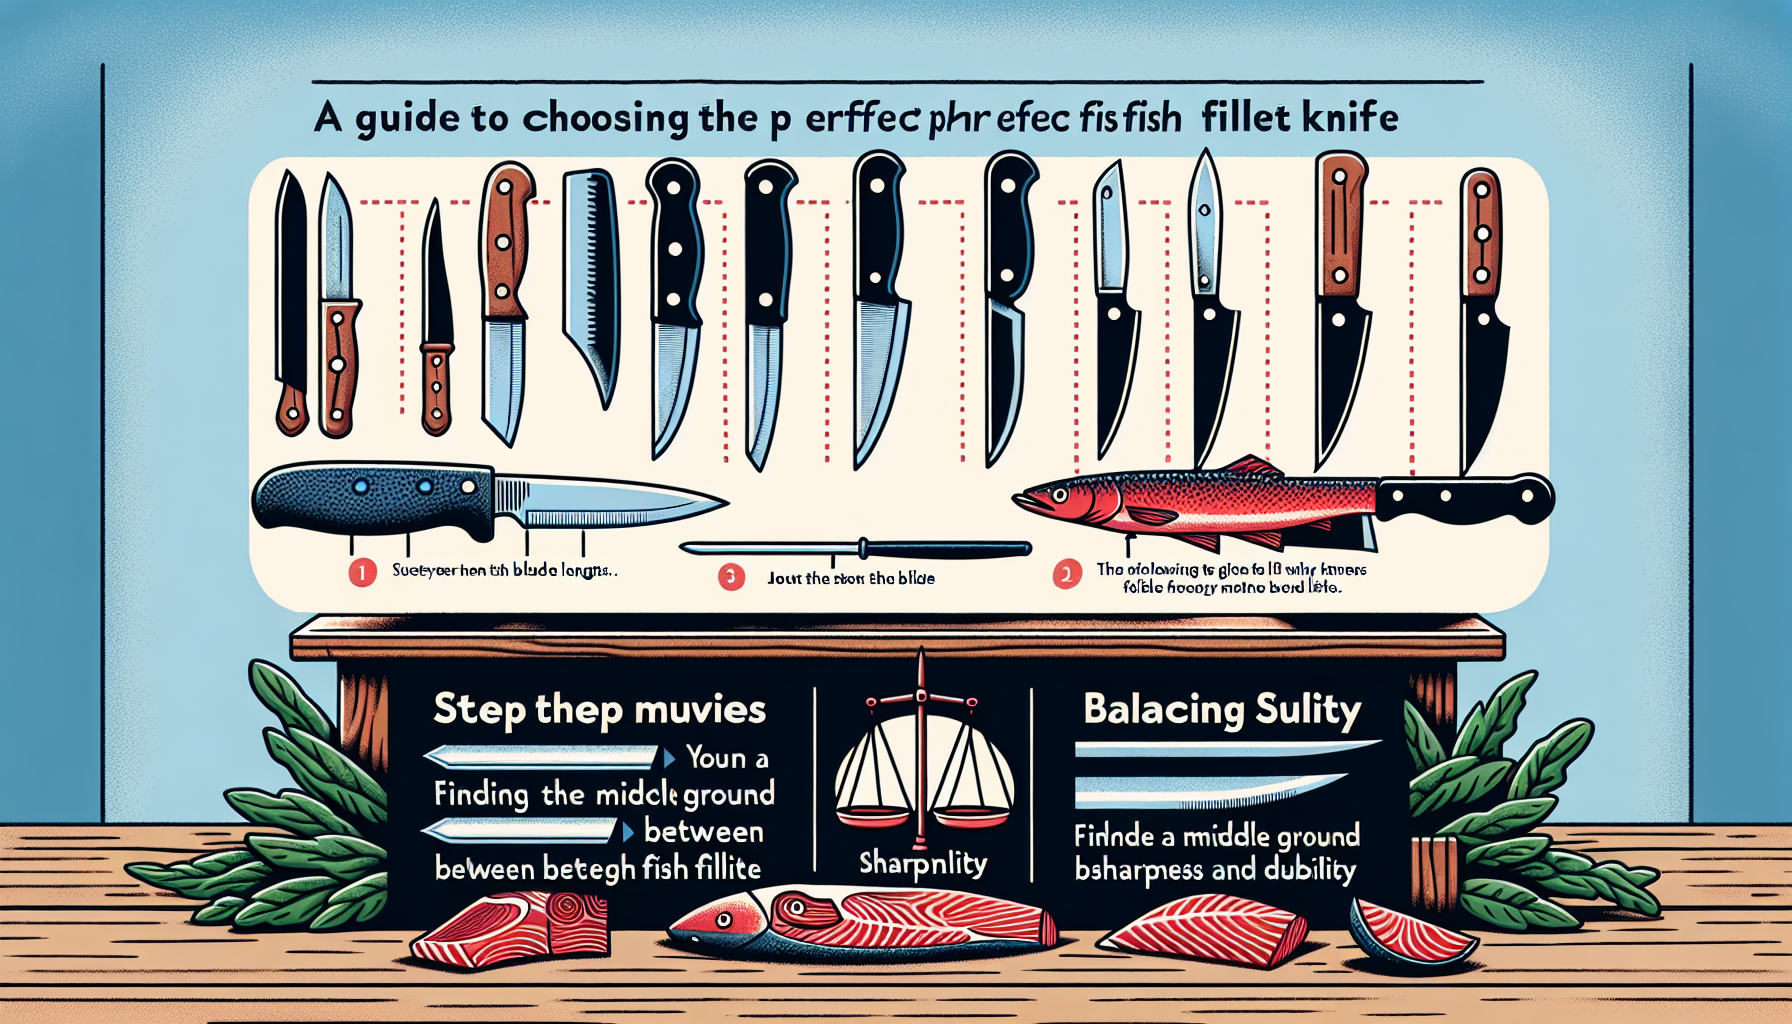 A Guide to Choosing the Perfect Fish Fillet Knife